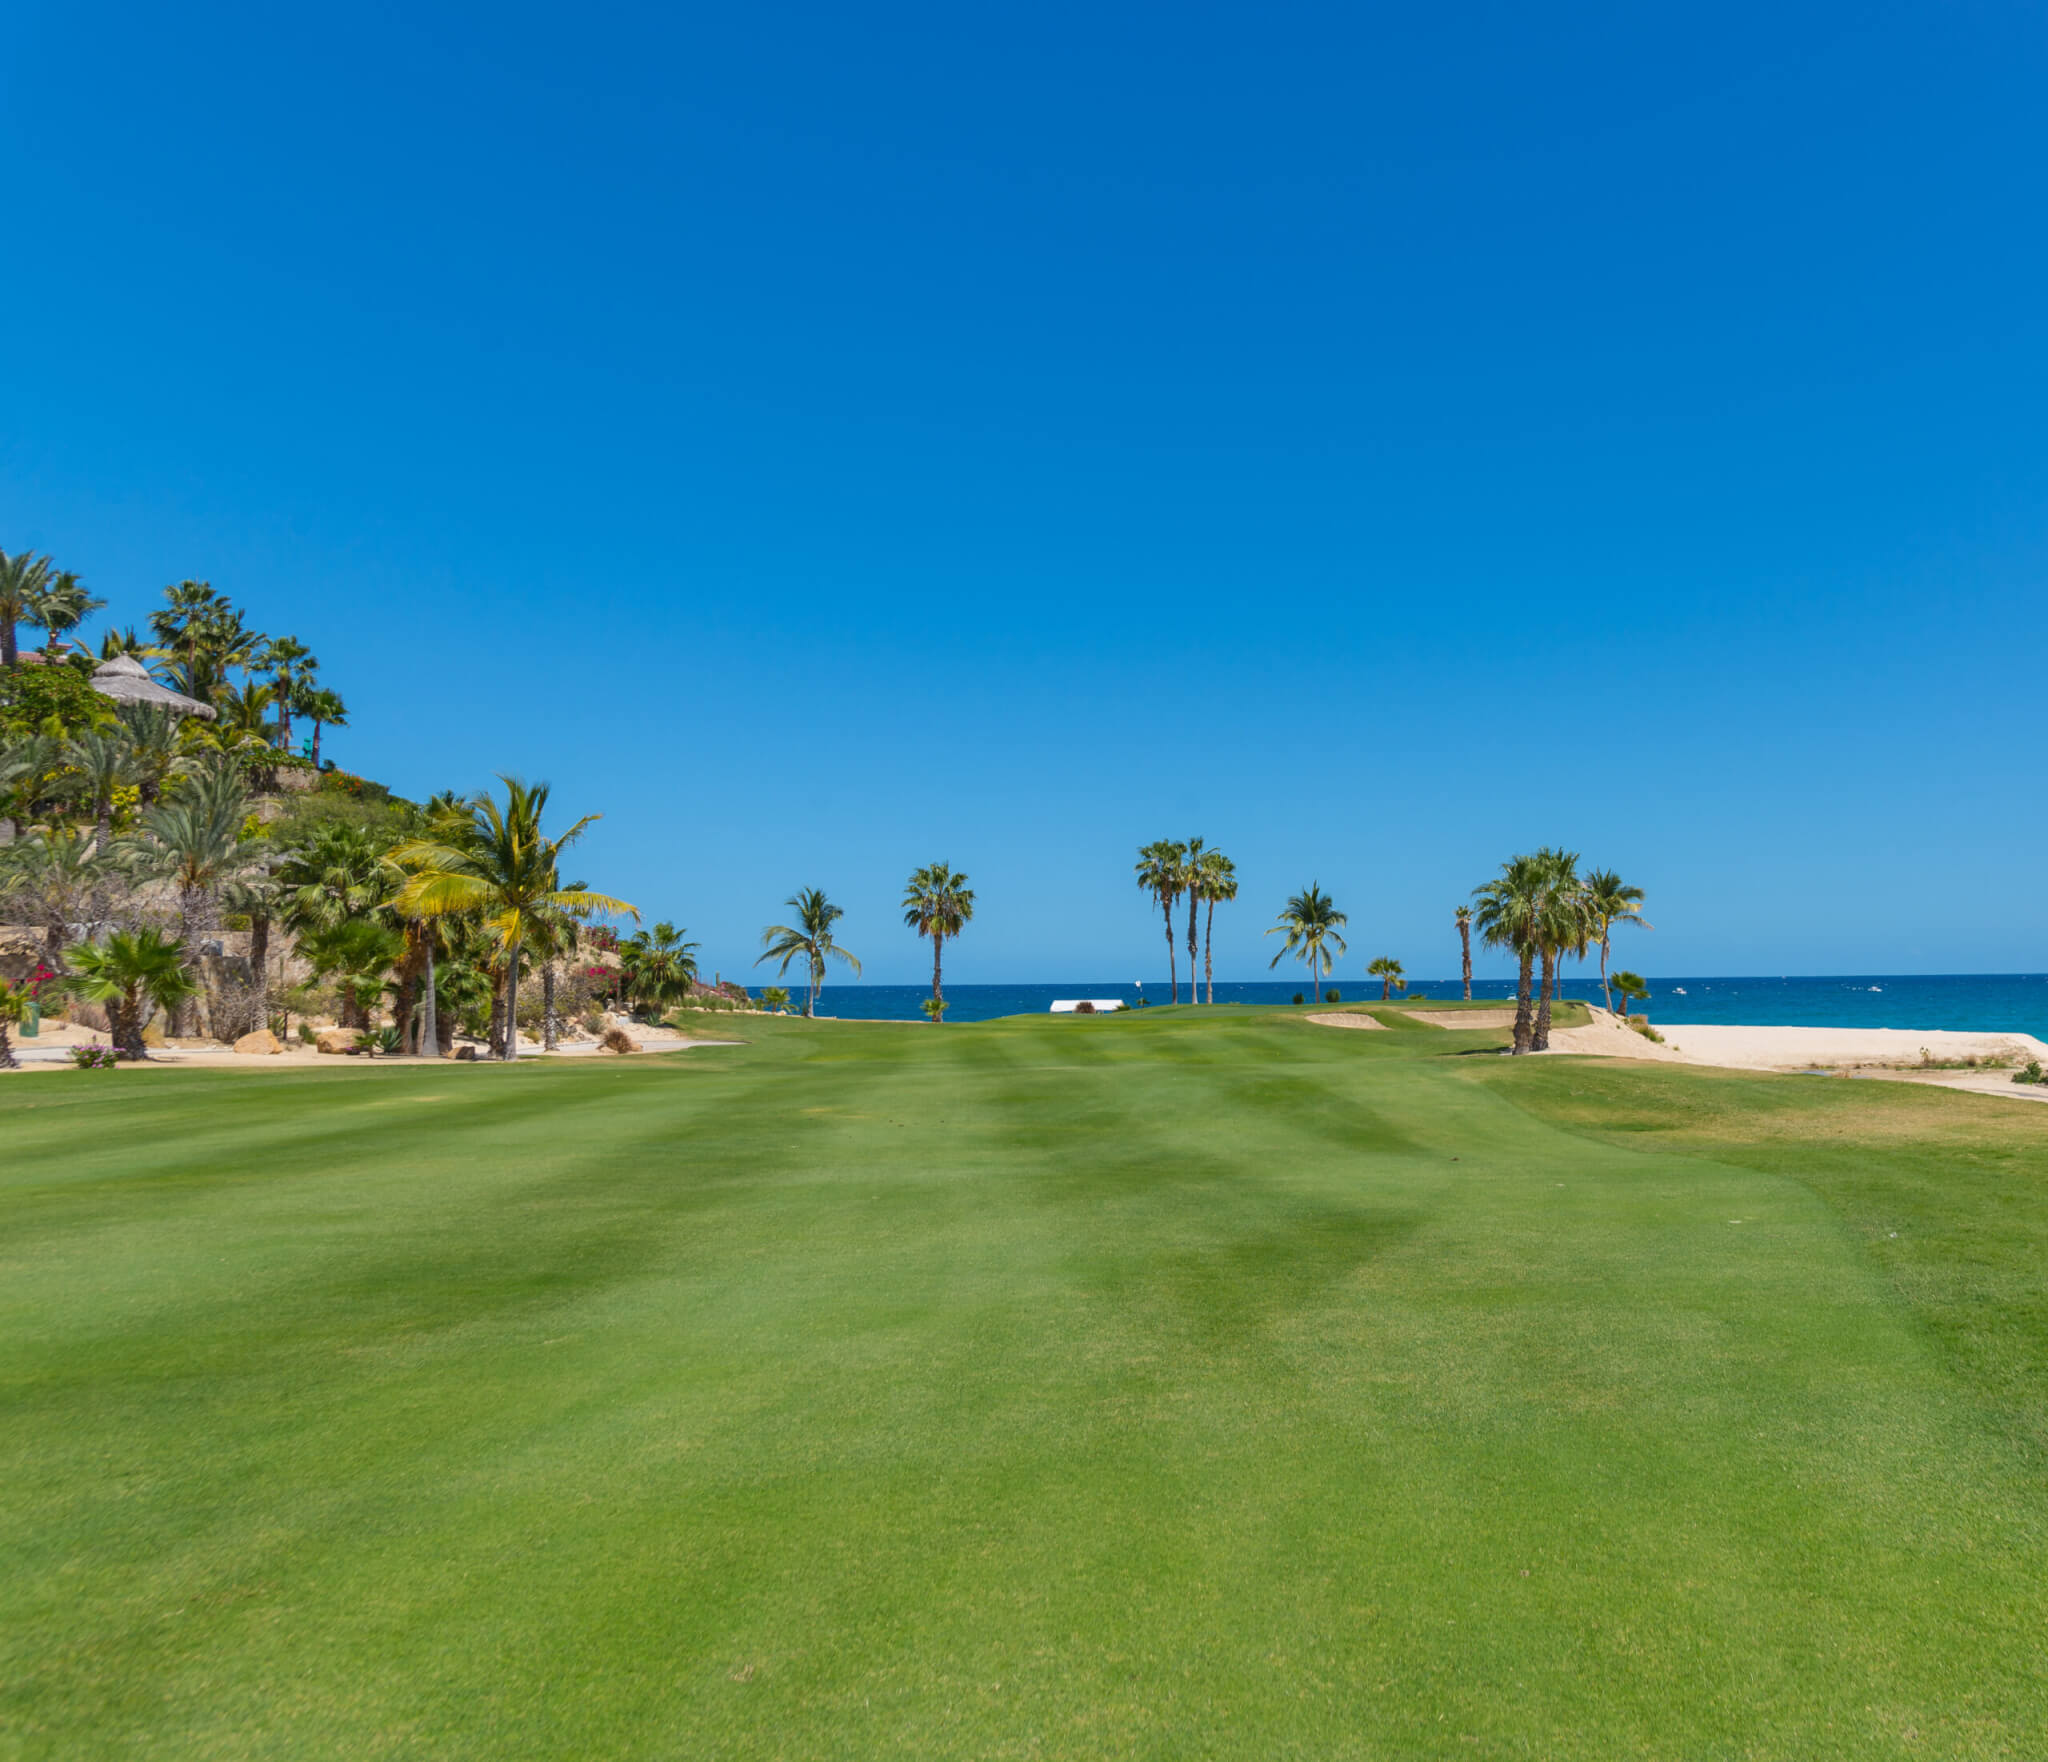 Beautiful golf hole in mexico